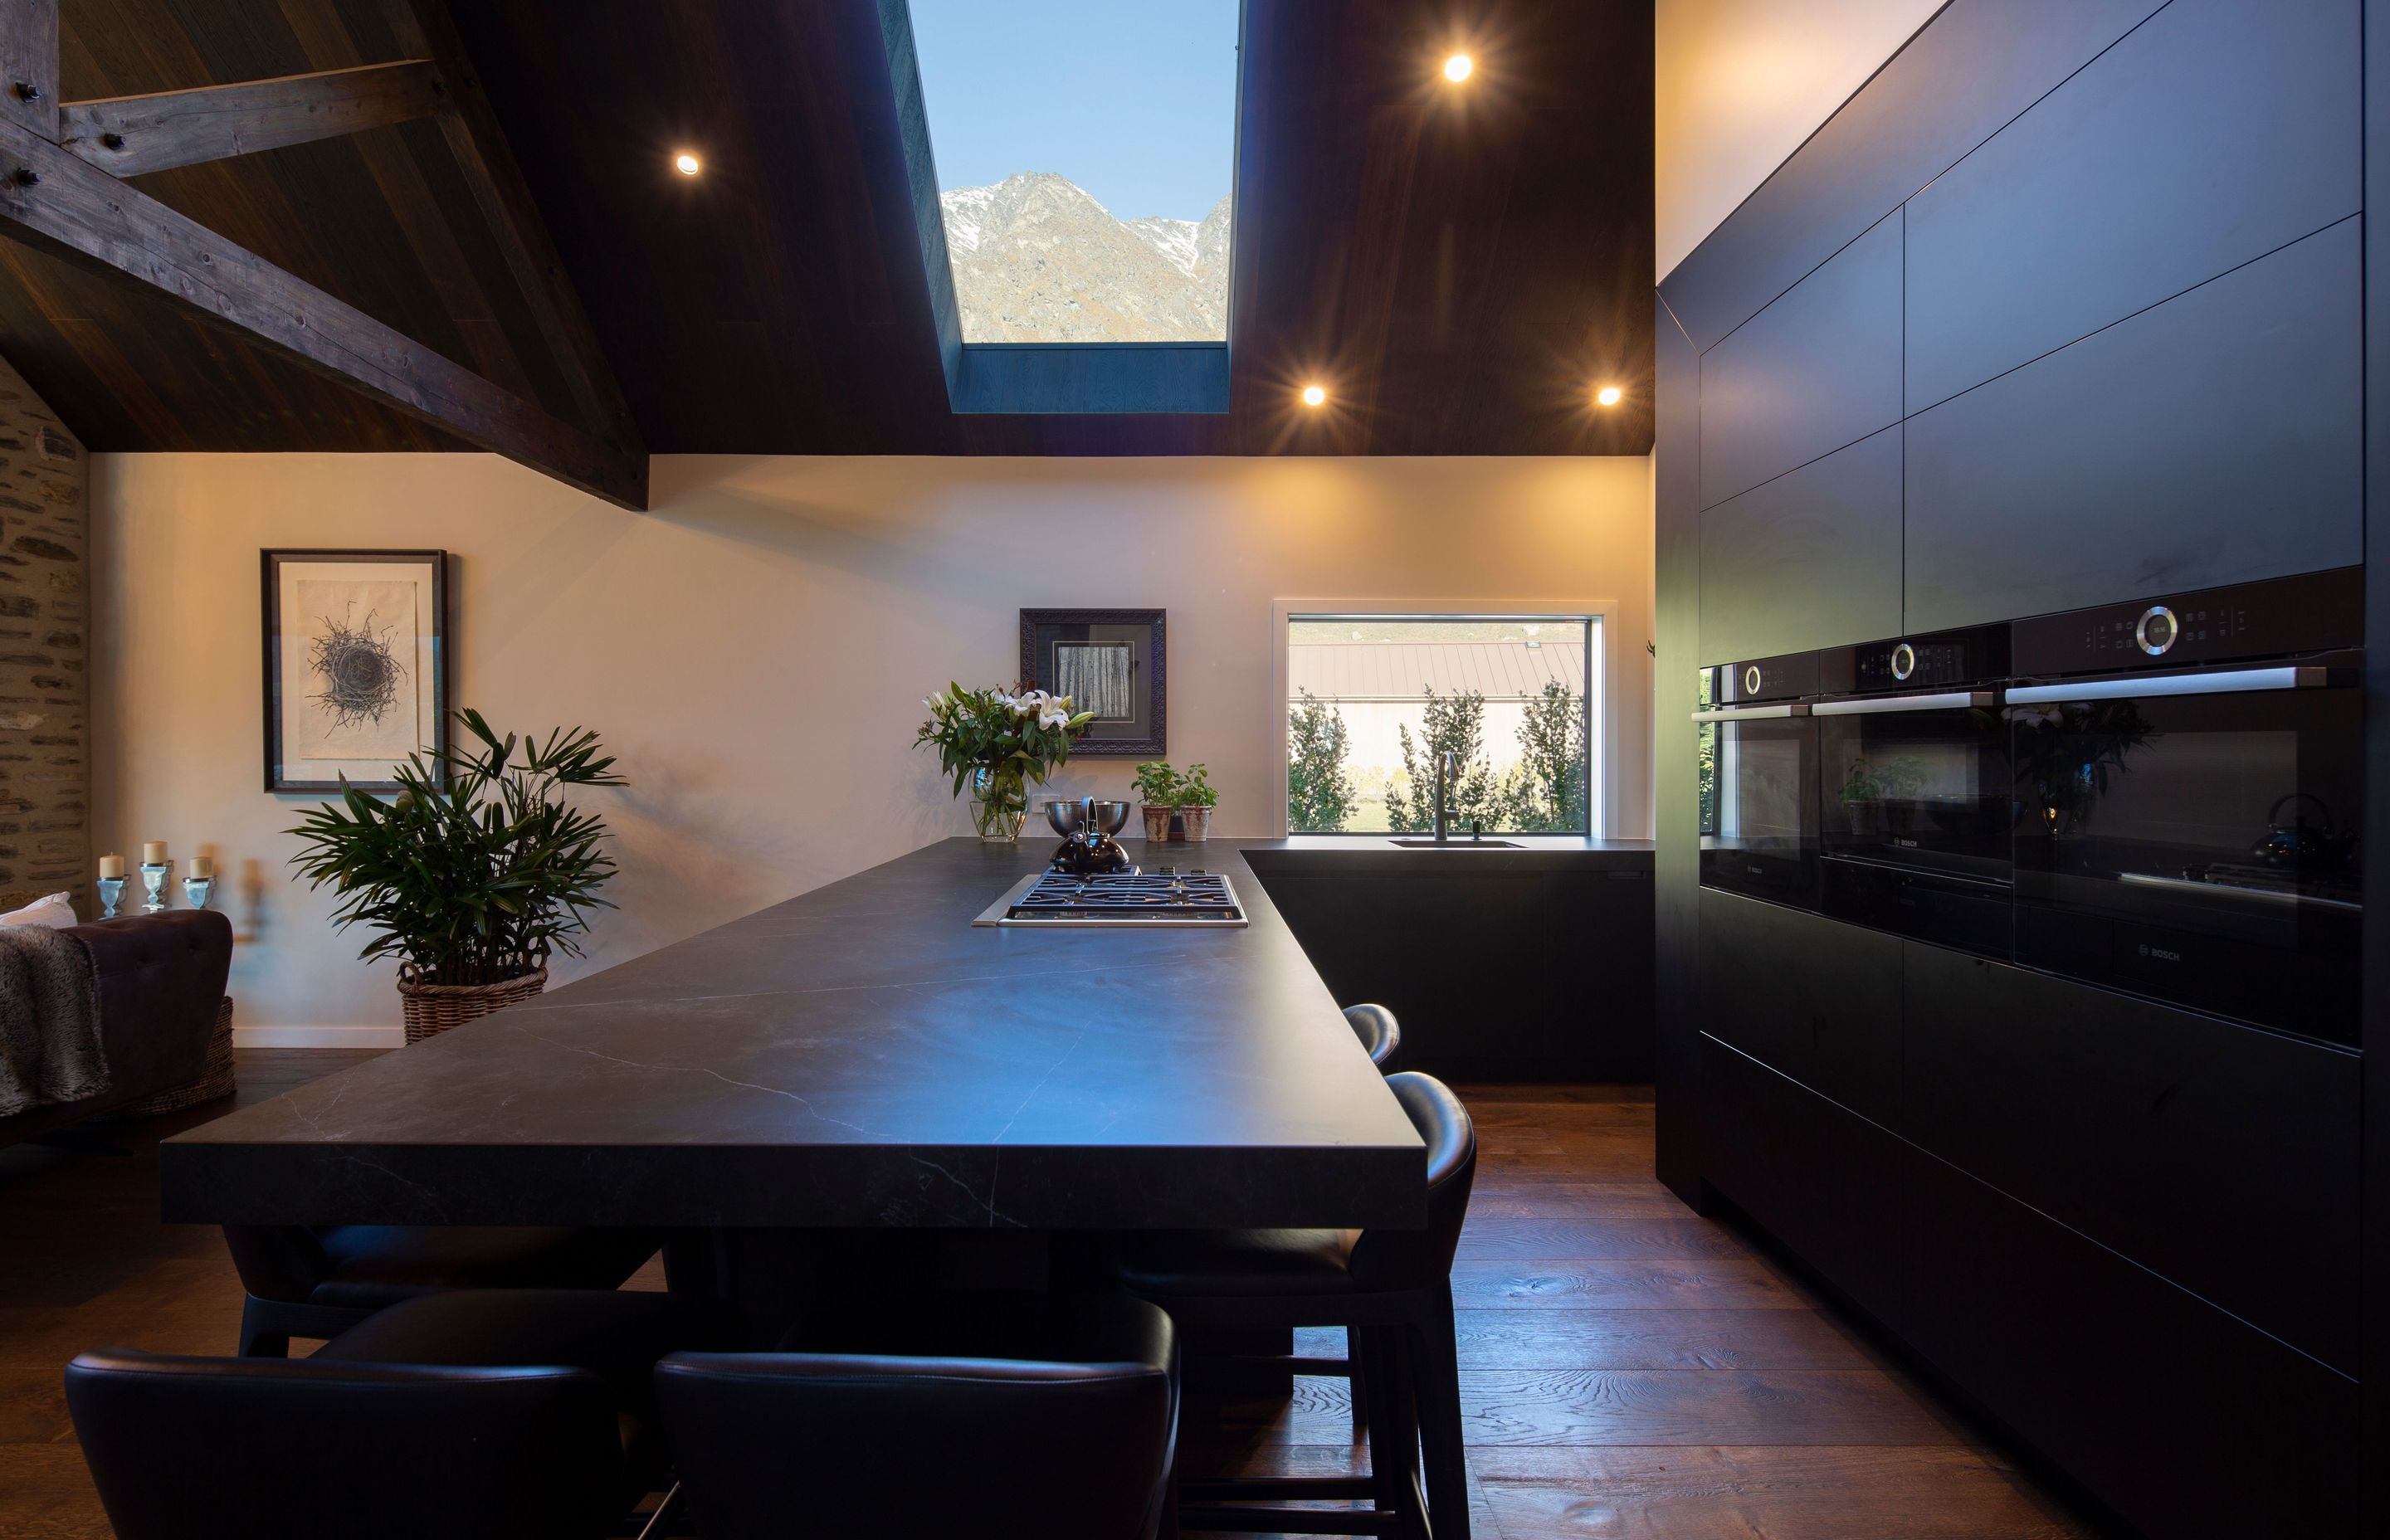 The kitchen features charcoal-toned cabinetry and a matte-black peninsula with a hob inset for meal preparation while chatting with friends. Through the skylight, the cook gets a peek at The Remarkables.